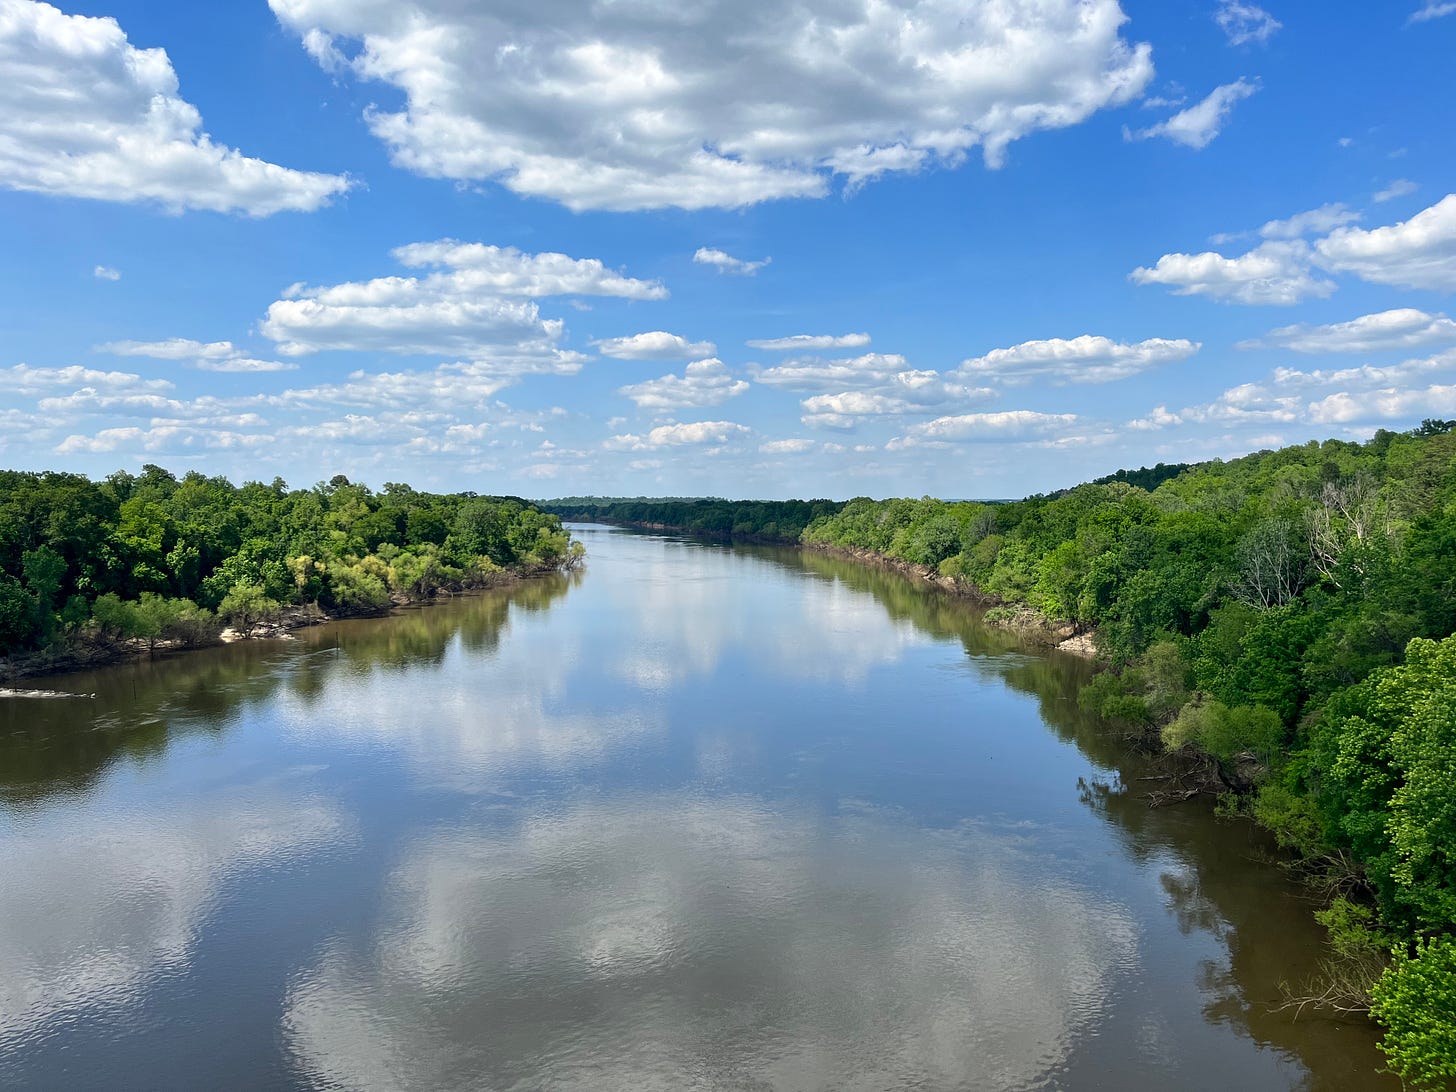 Photo of the Alabama River with blue sky and some clouds reflected in the water